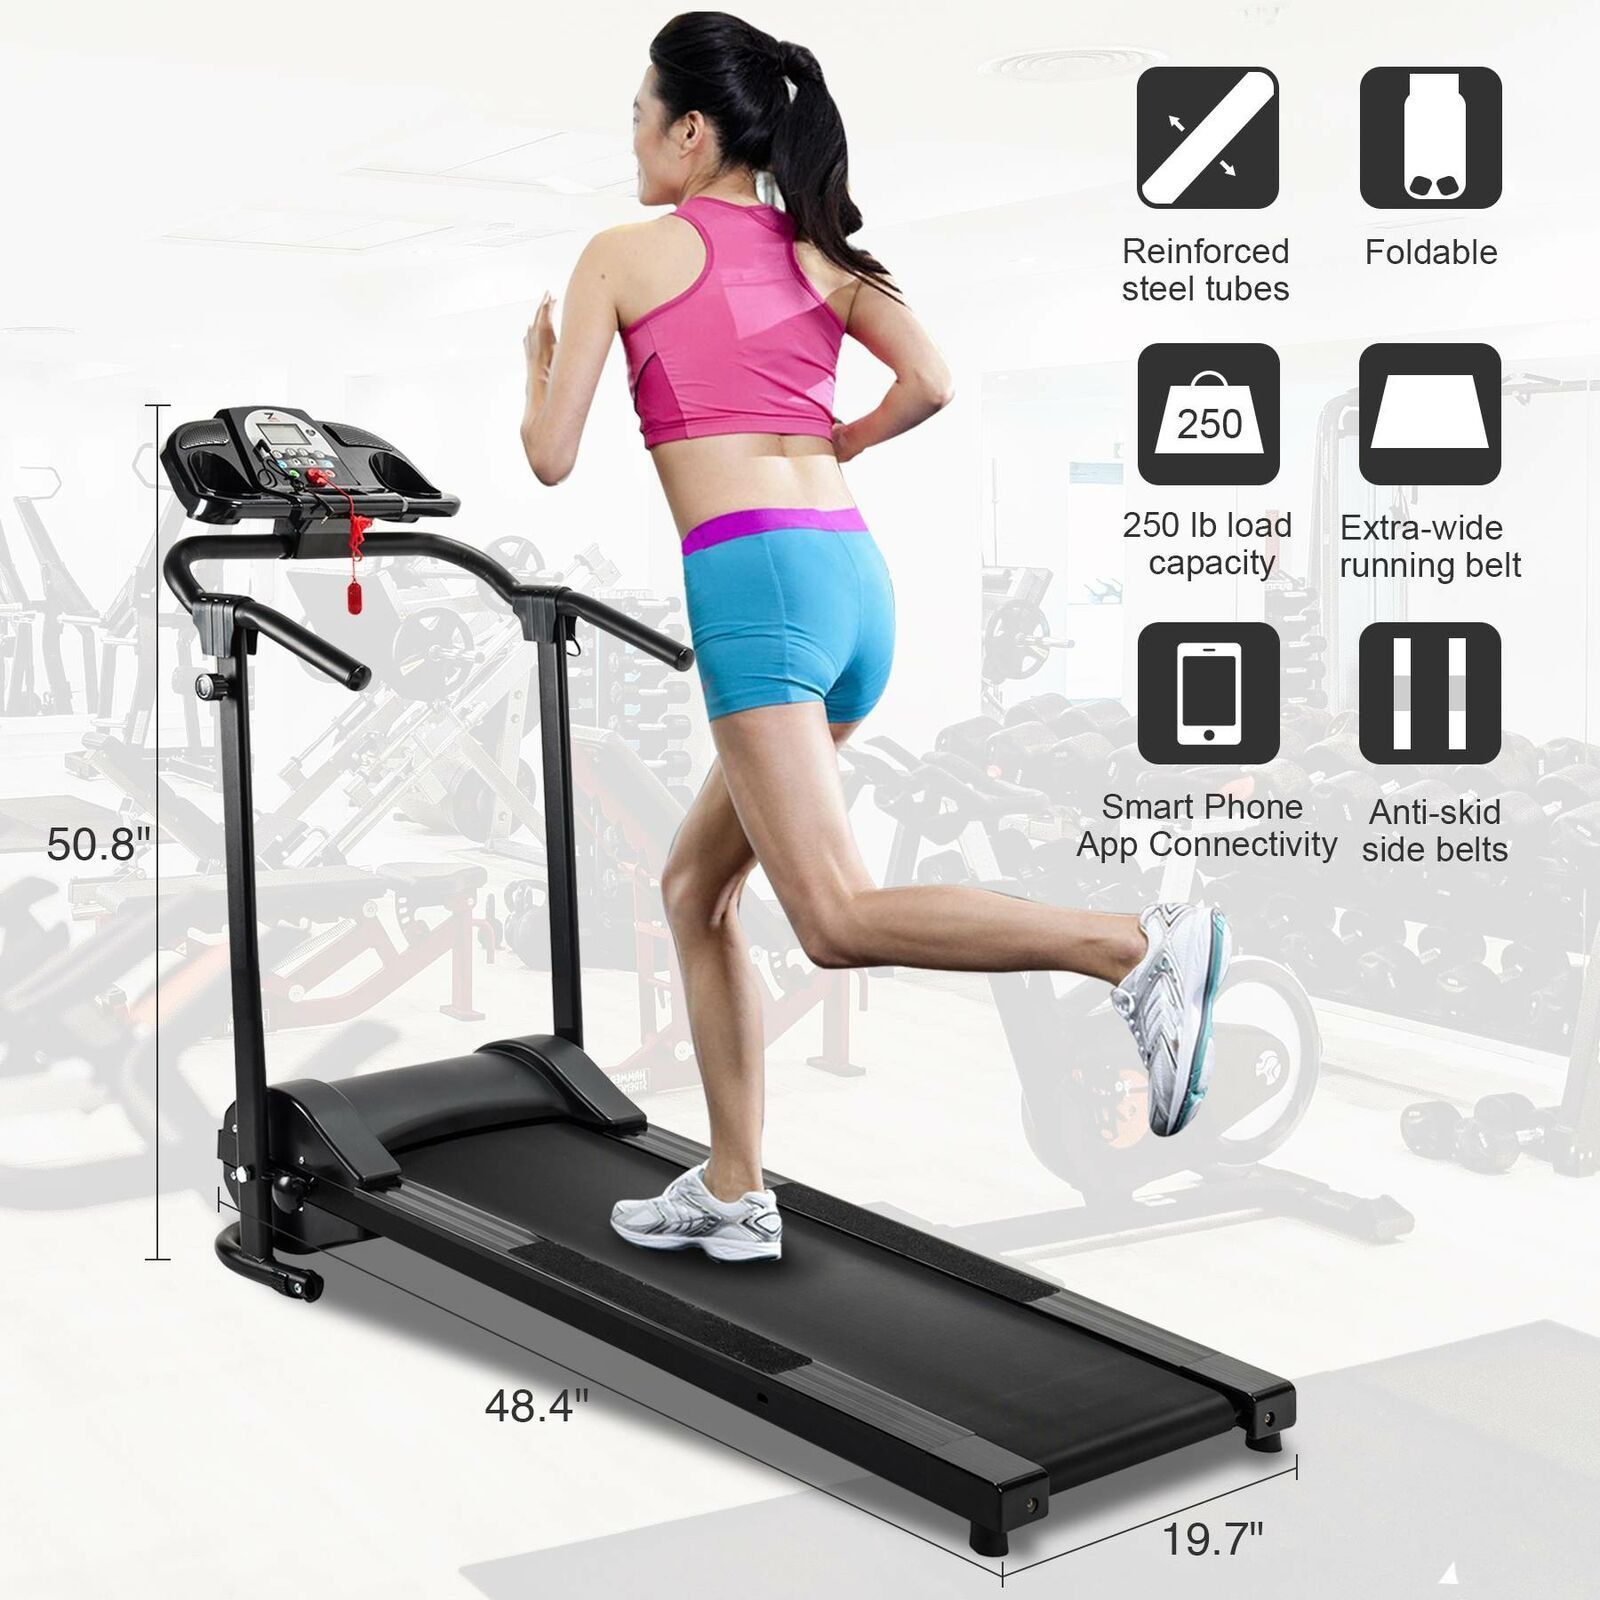 Title: Folding Treadmill Electric Motorized Power Running Jogging Fitness Machine (FINANCE AVAILABLE) Description: SECURE STEEL CONSTRUCTION - Ultra-